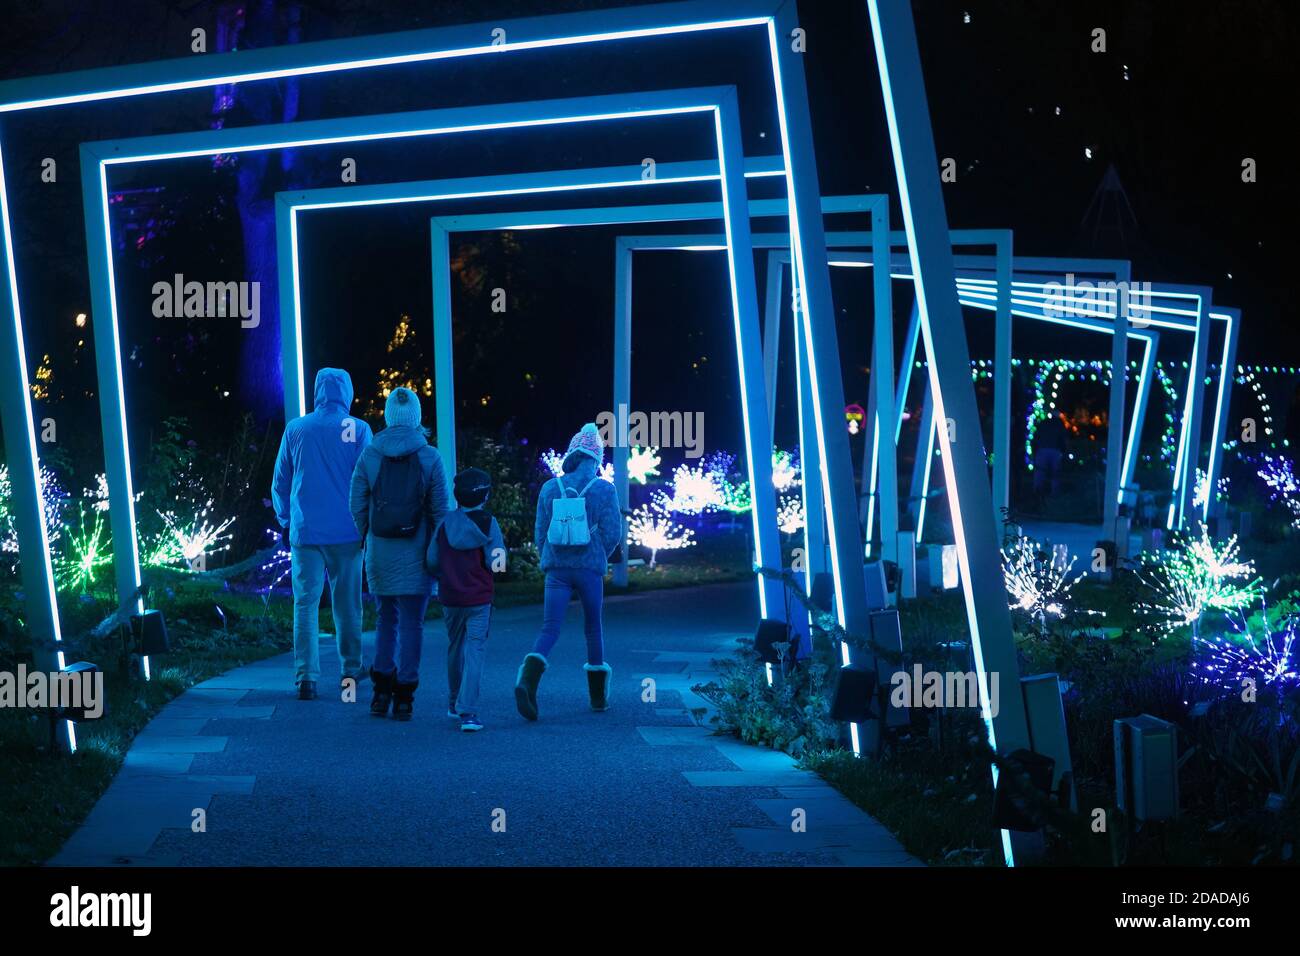 St. Louis, United States. 11th Nov, 2020. A family walks through a lighted display on opening night of Garden Glow at The Missouri Botanical Garden in St. Louis on Wednesday, November 11, 2020. Photo by Bill Greenblatt/UPI Credit: UPI/Alamy Live News Stock Photo